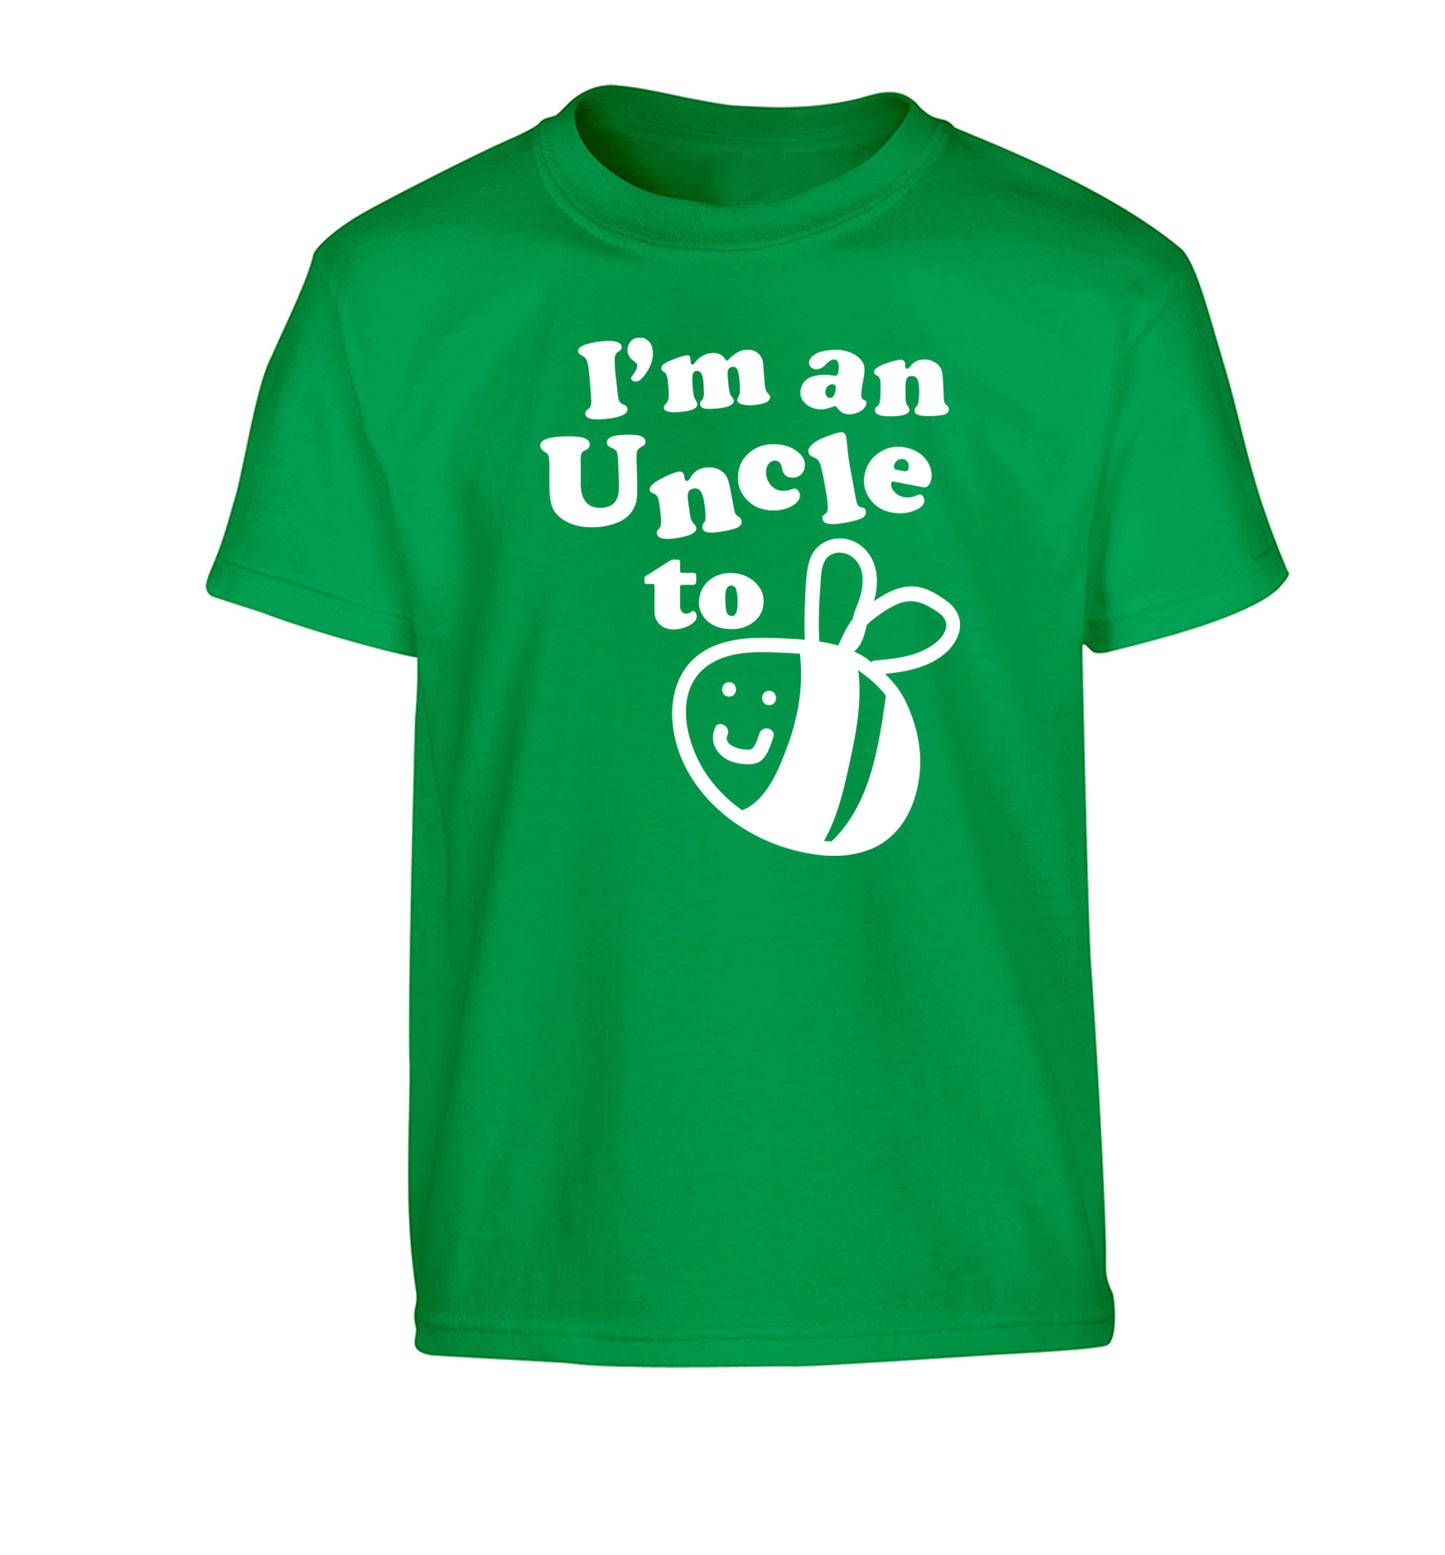 I'm an uncle to be Children's green Tshirt 12-14 Years